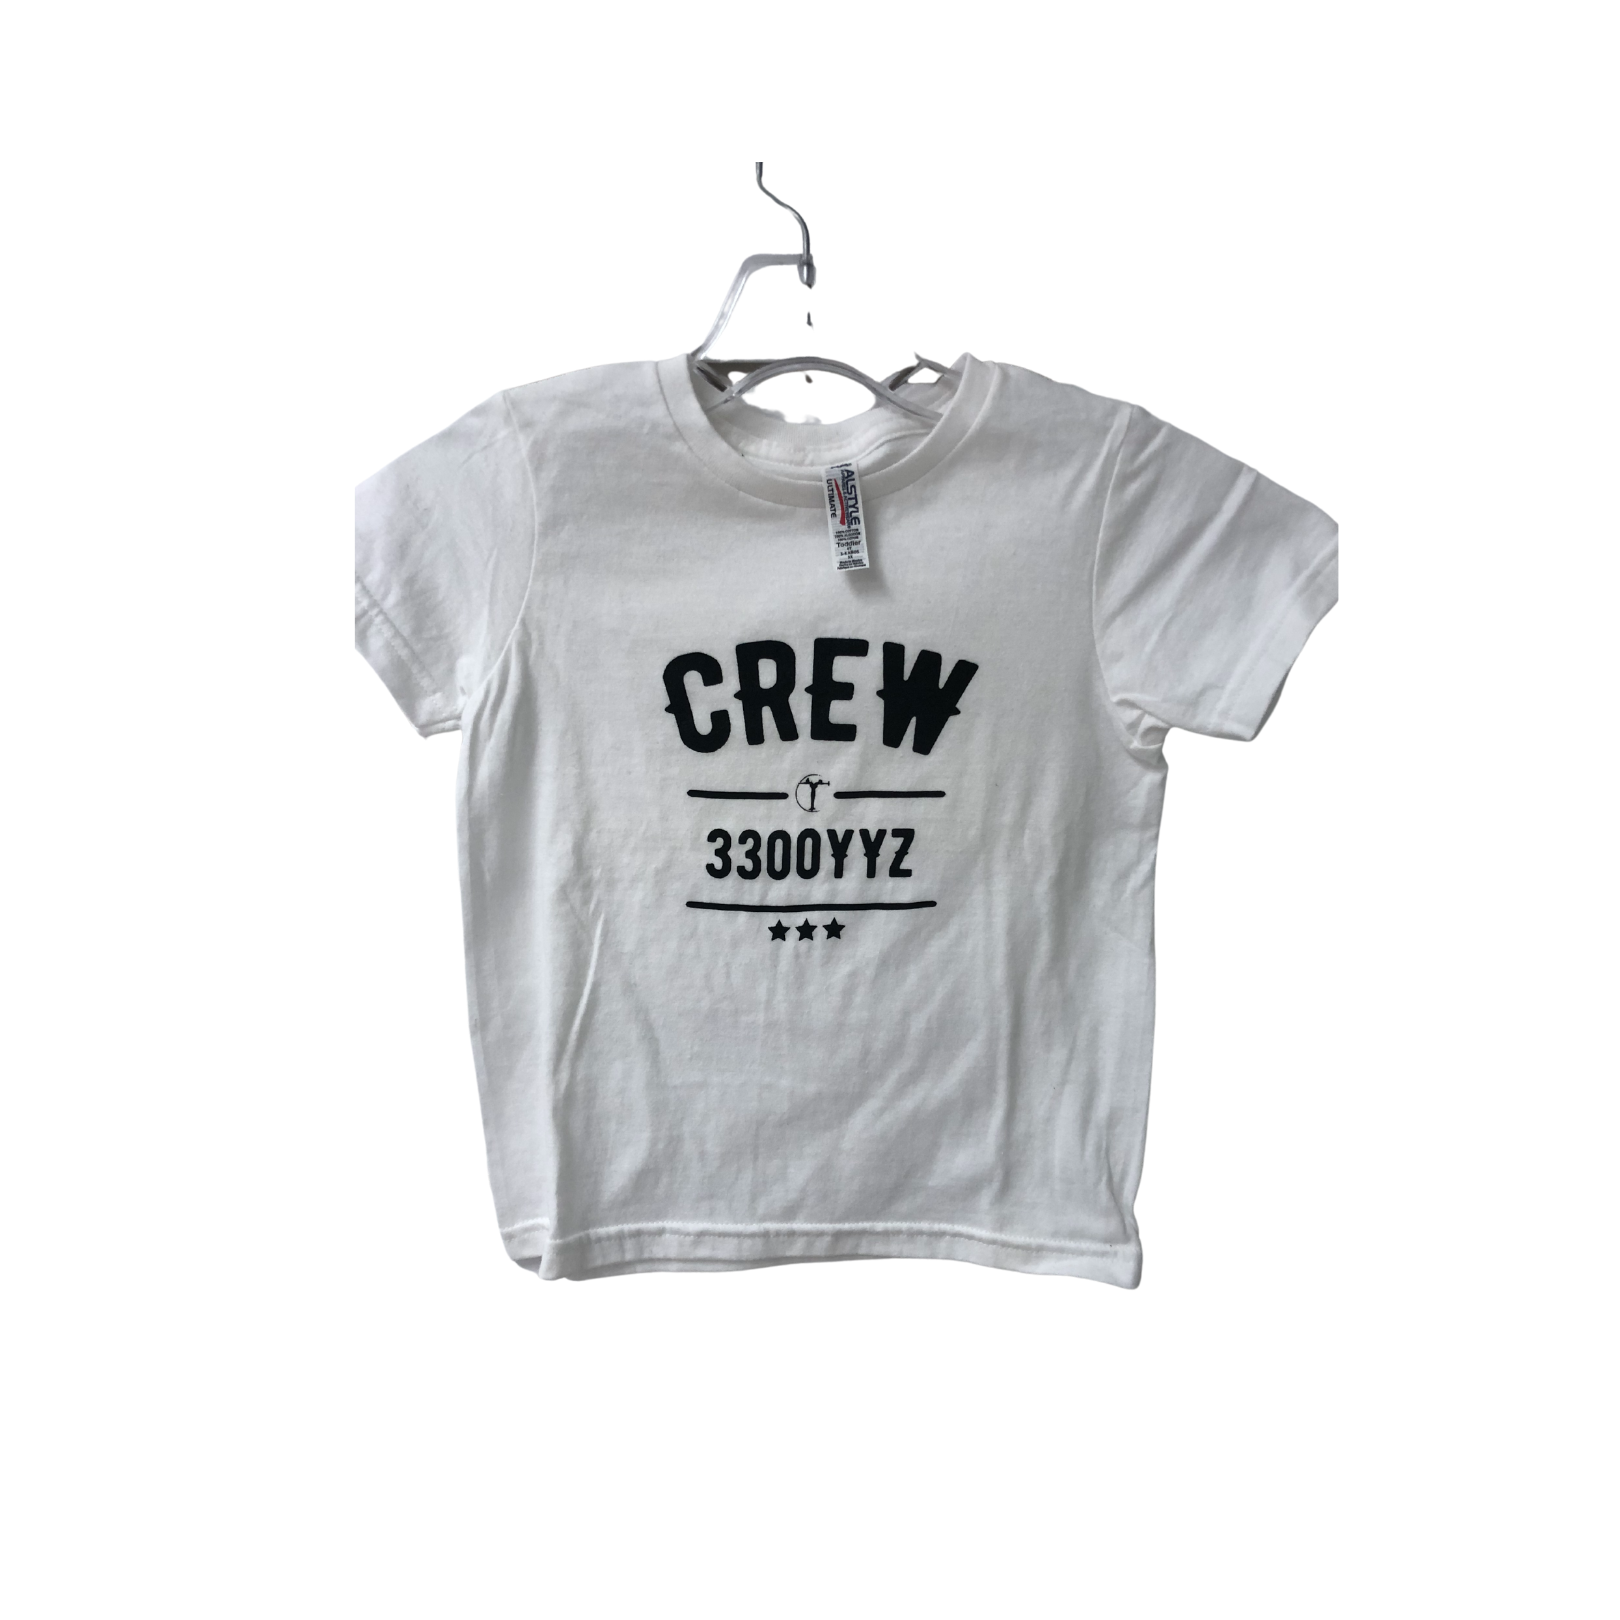 CREW Collection T-Shirt - Toddler - TandemWear